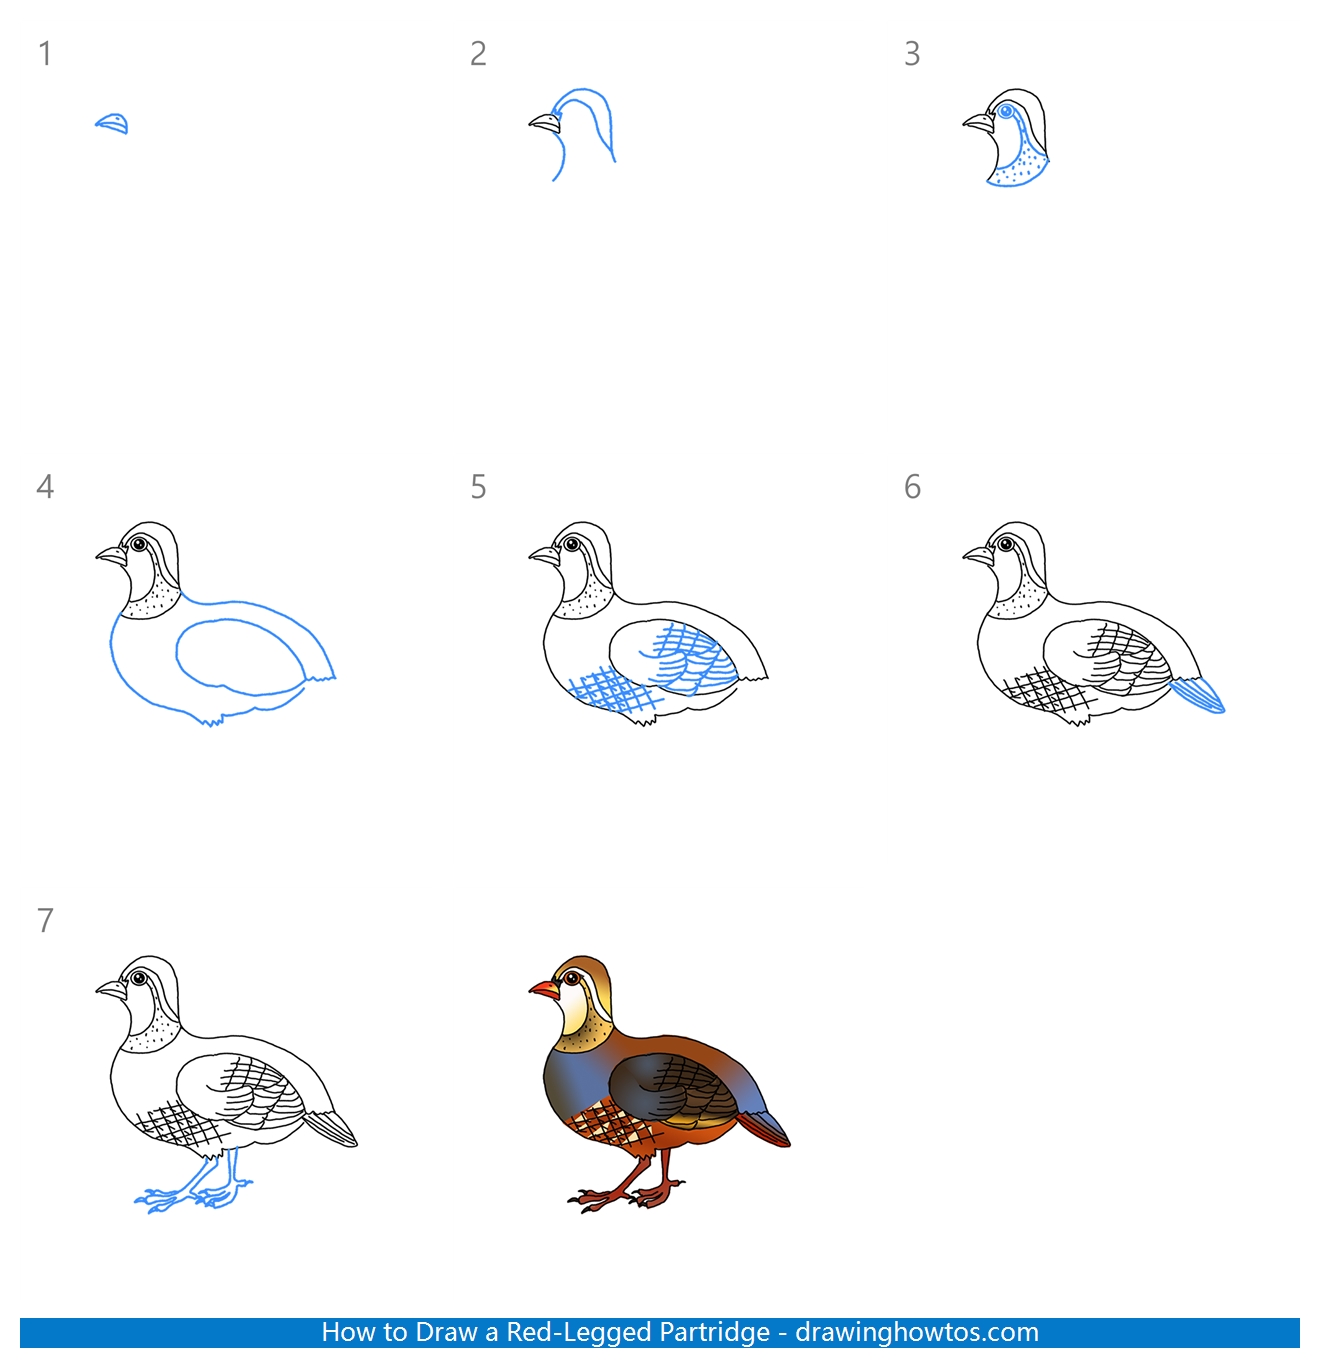 How to Draw a Red-legged Partridge Step by Step